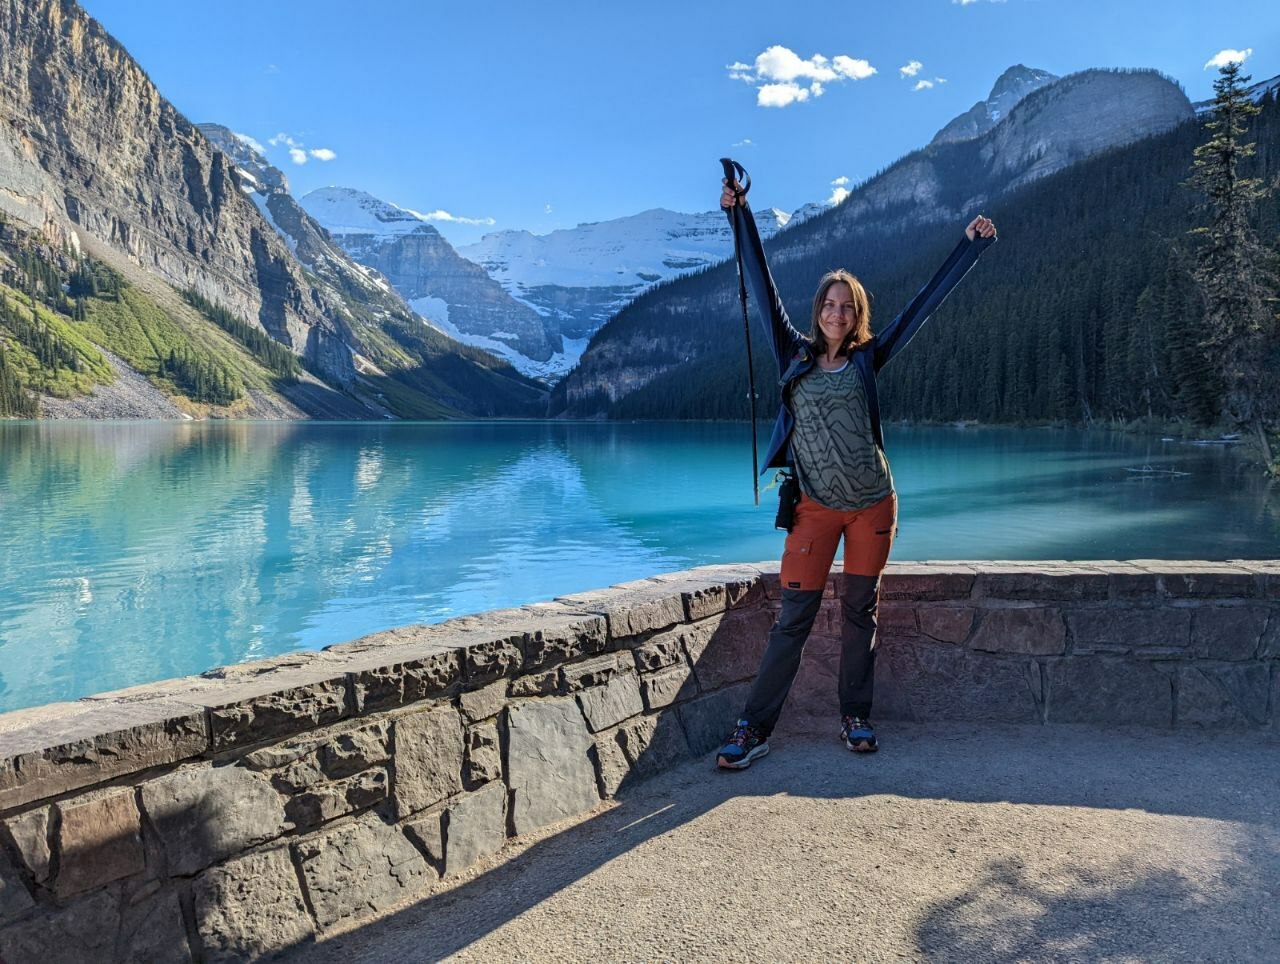 <span style="font-weight: bold;">DAY AT LAKE LOUISE<br></span>